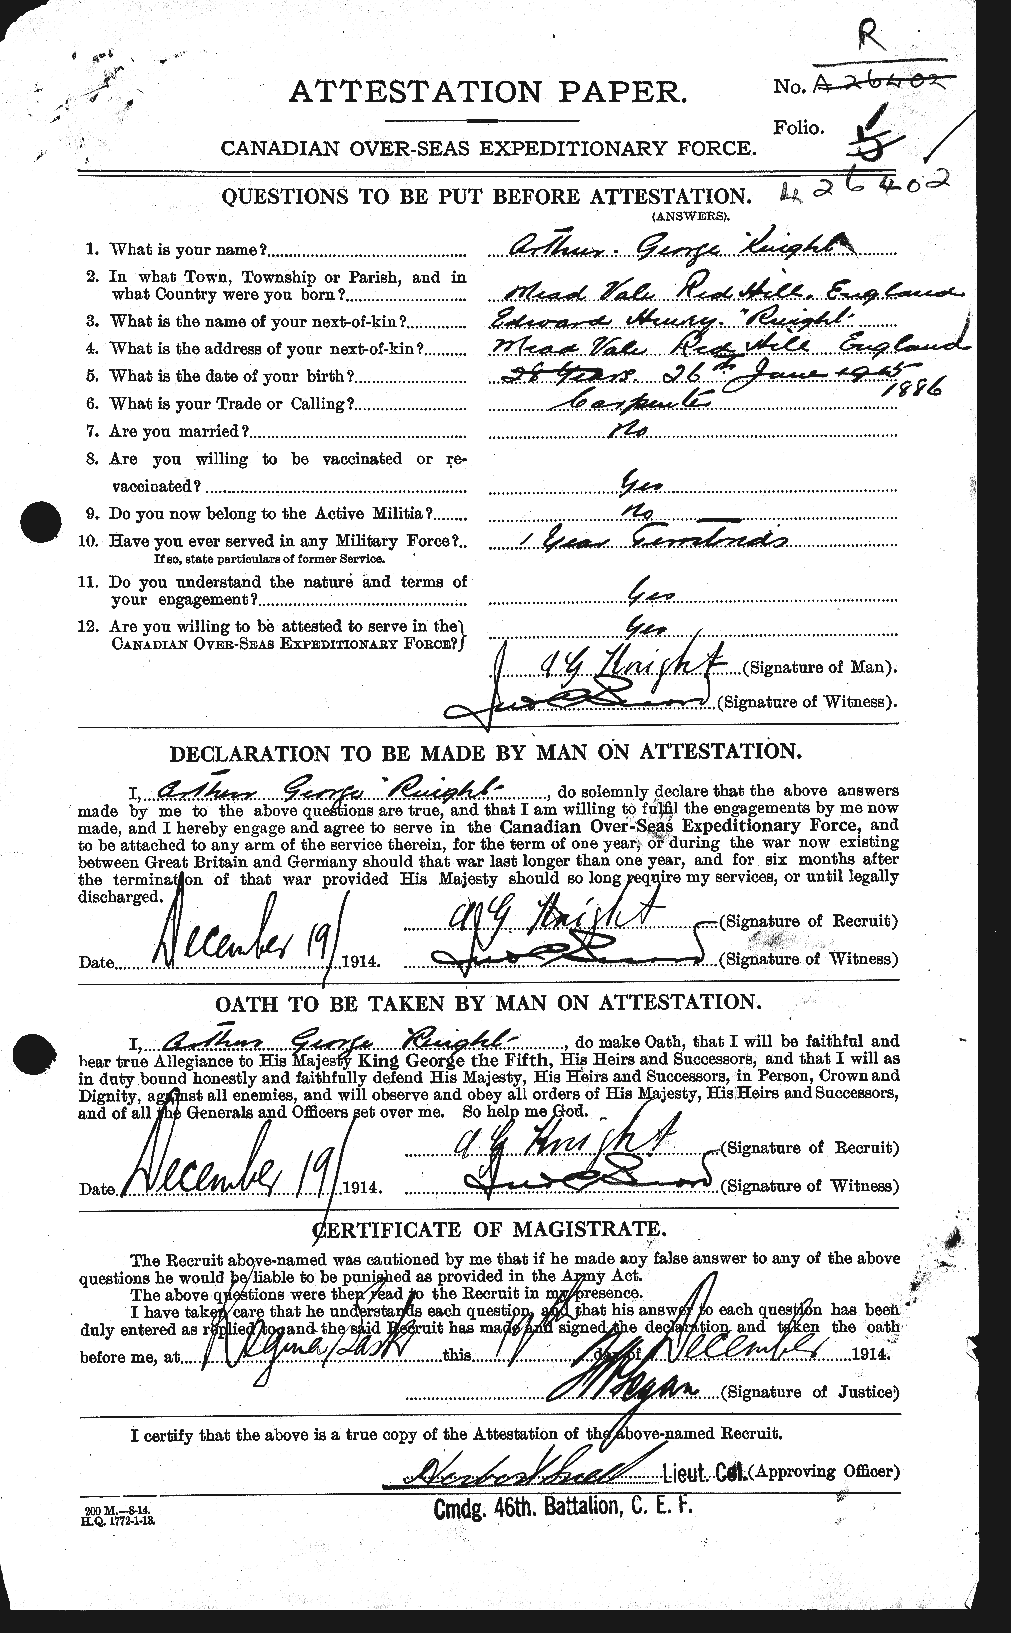 Personnel Records of the First World War - CEF 206298a